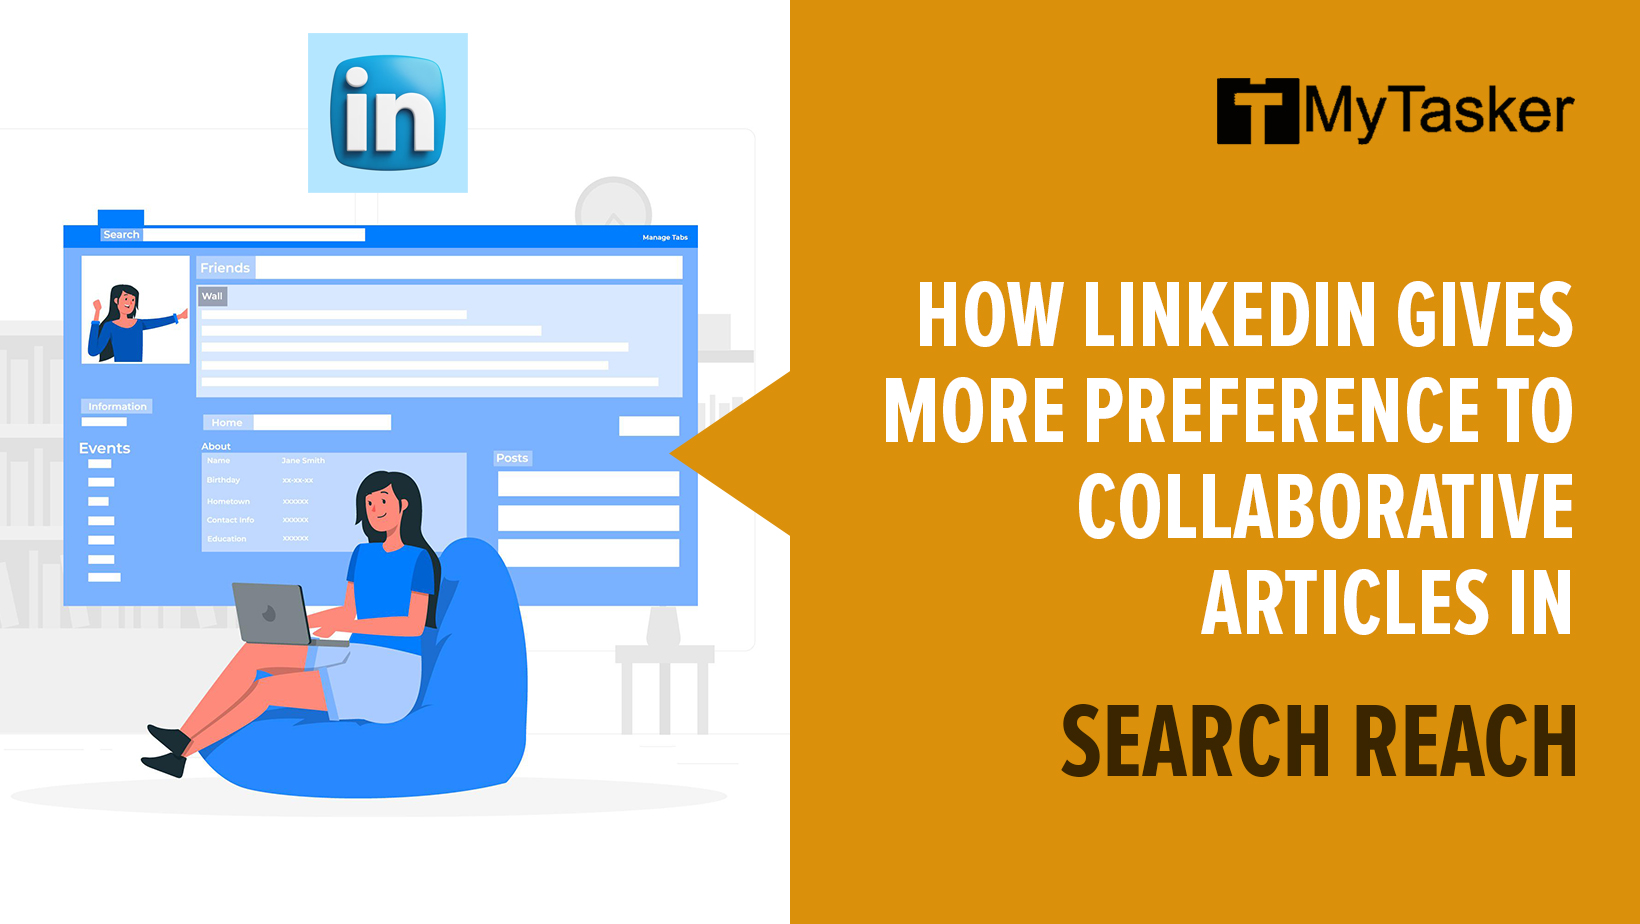 How LinkedIn Gives More Preference to Collaborative Articles in Search Reach